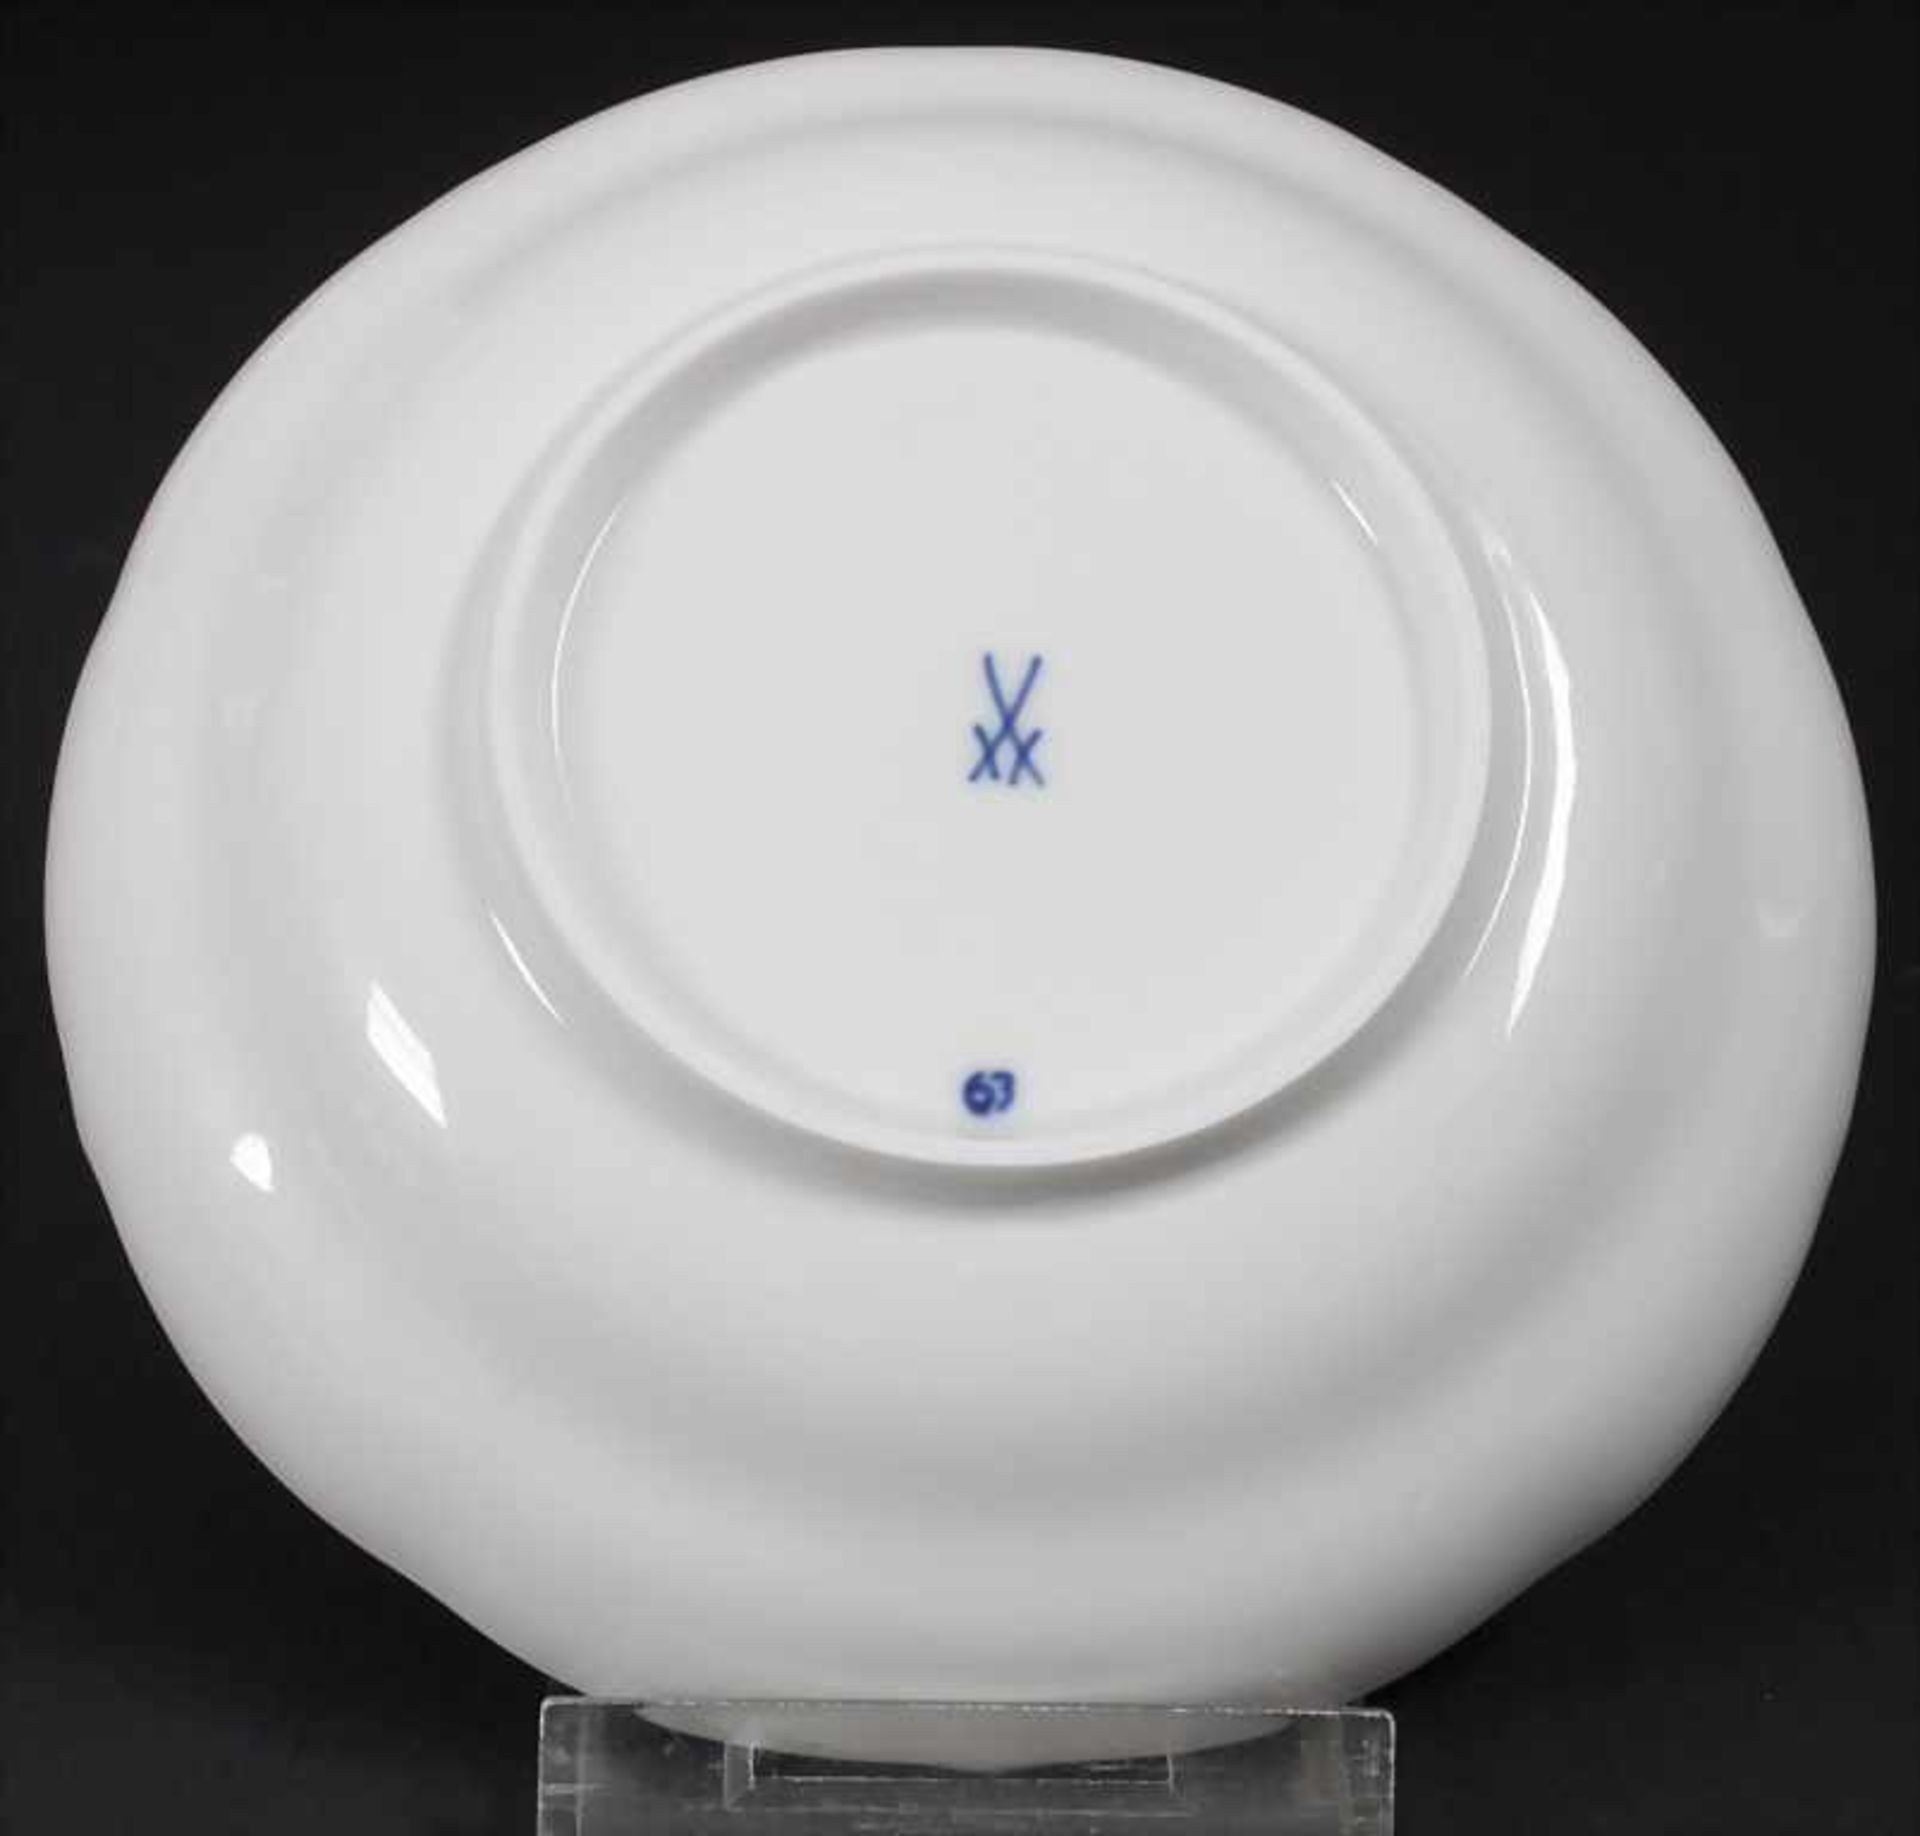 28 tlg. Service 'Zwiebelmuster' / A 28-piece dinner set with 'Onion Pattern', Meissen, 20. Jh. - Image 10 of 17